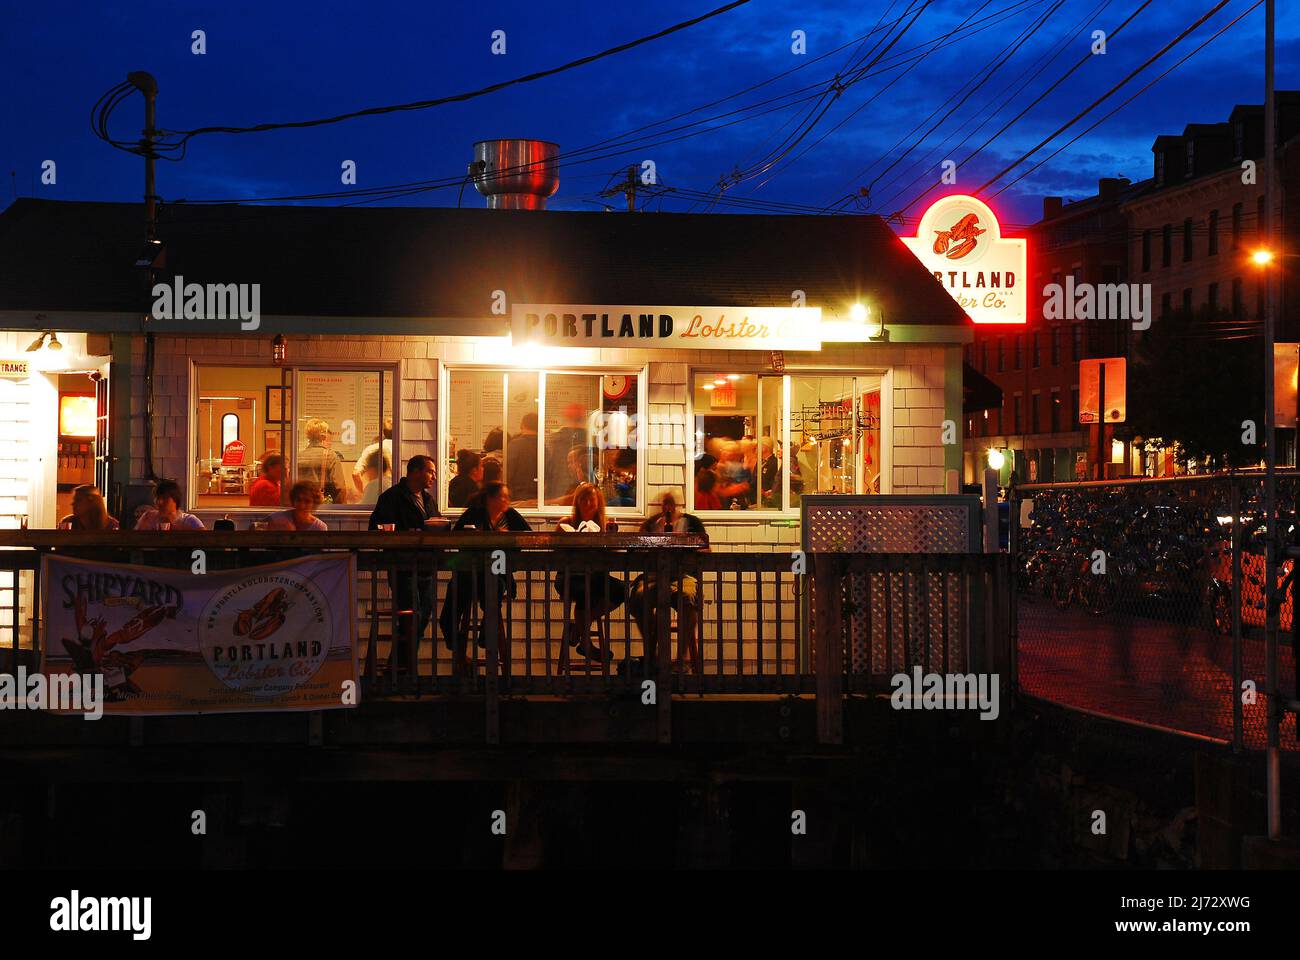 Diners enjoy s summer evening at a lobster shack in Portland, Maine Stock Photo